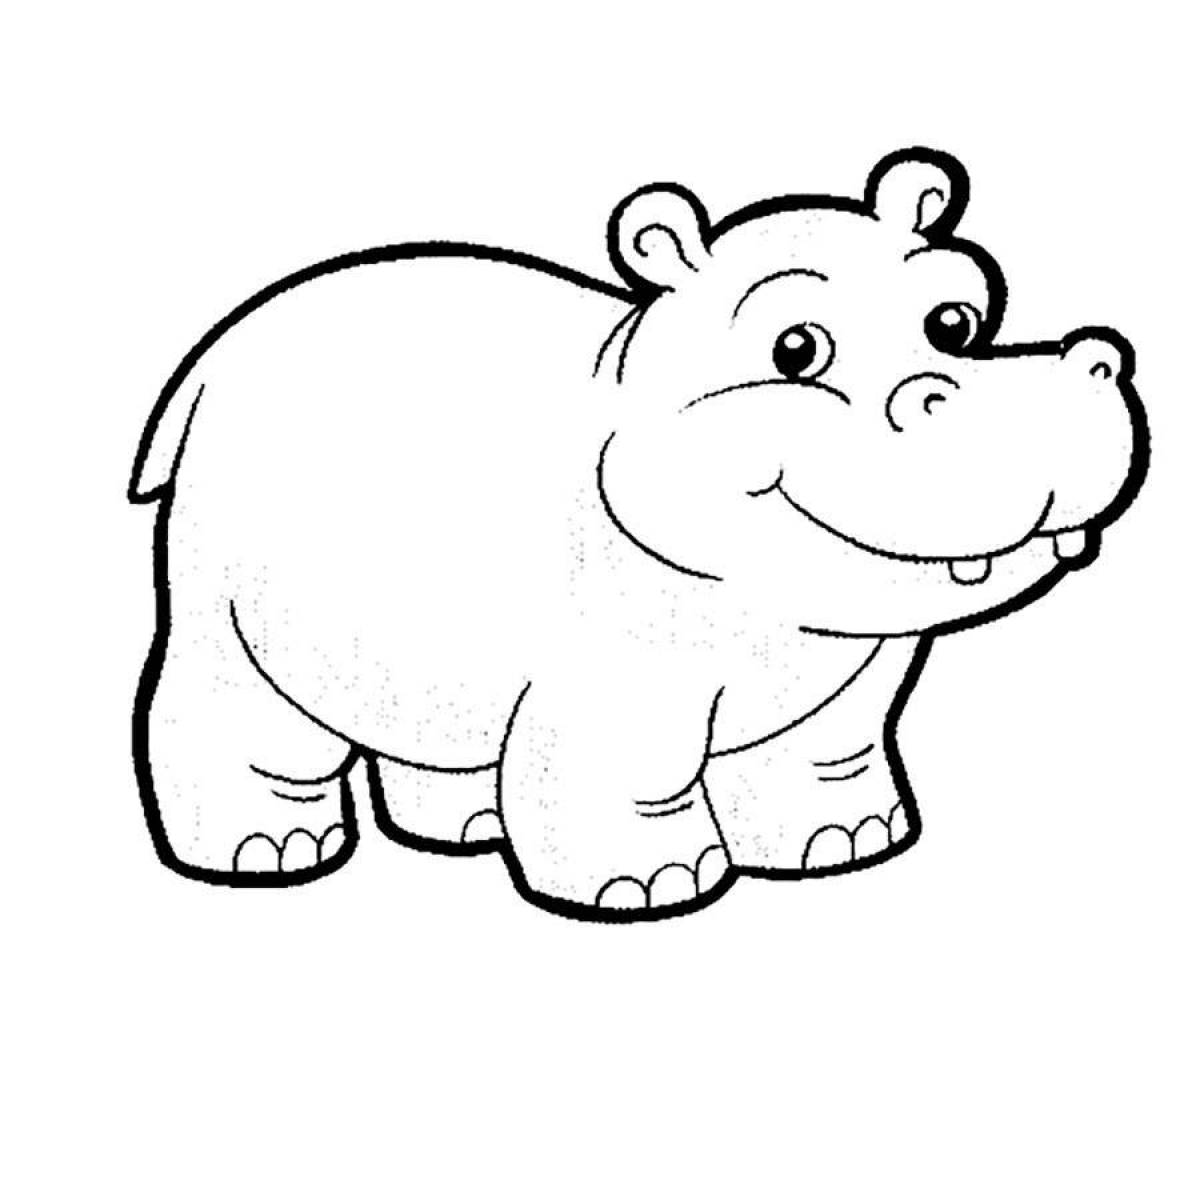 Fabulous hippo coloring for kids